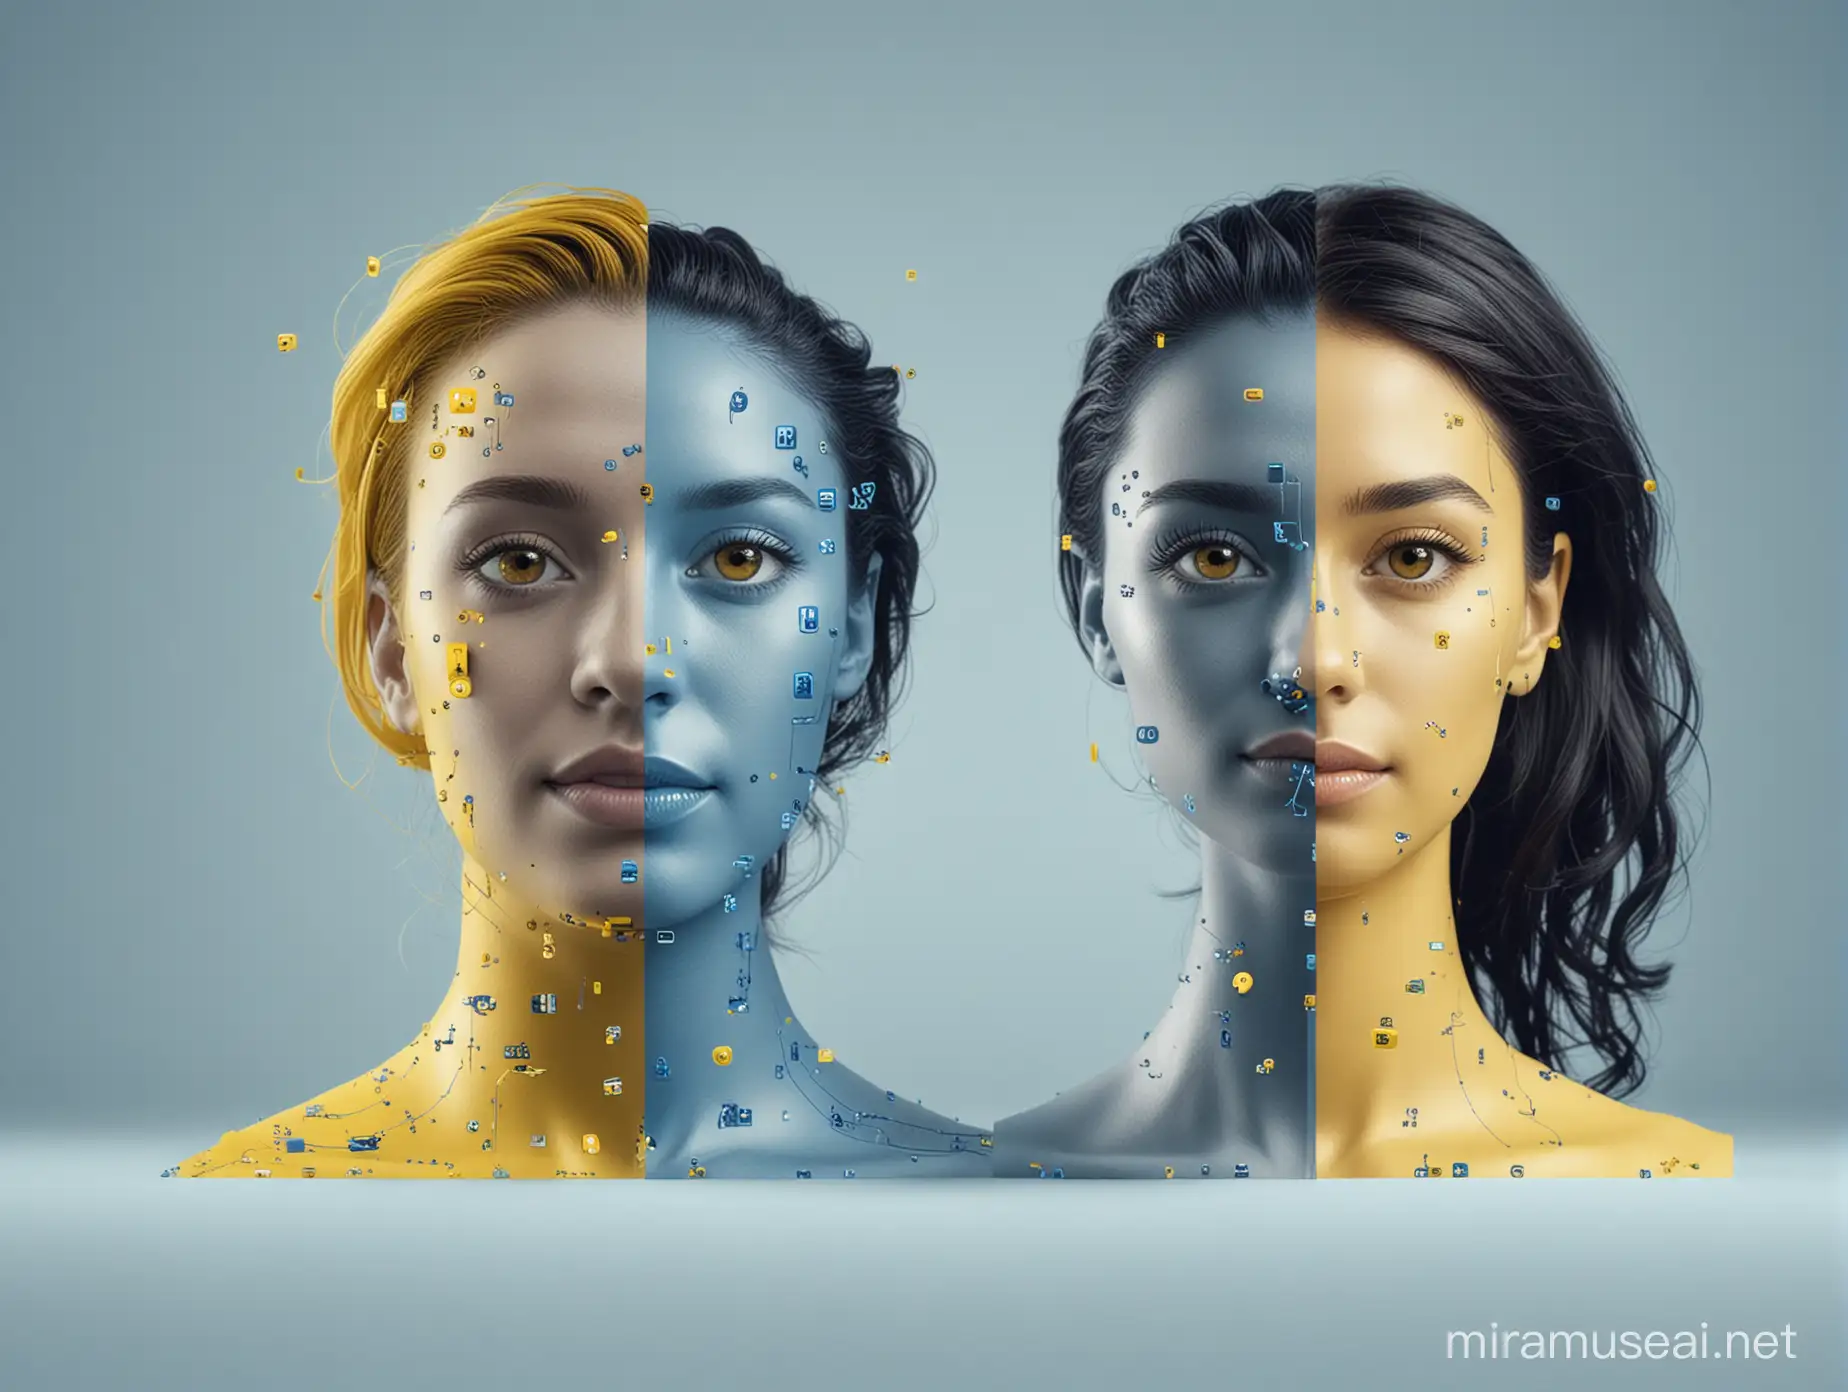 ai and social media, use blue and yellow colors. include two characters on the image
